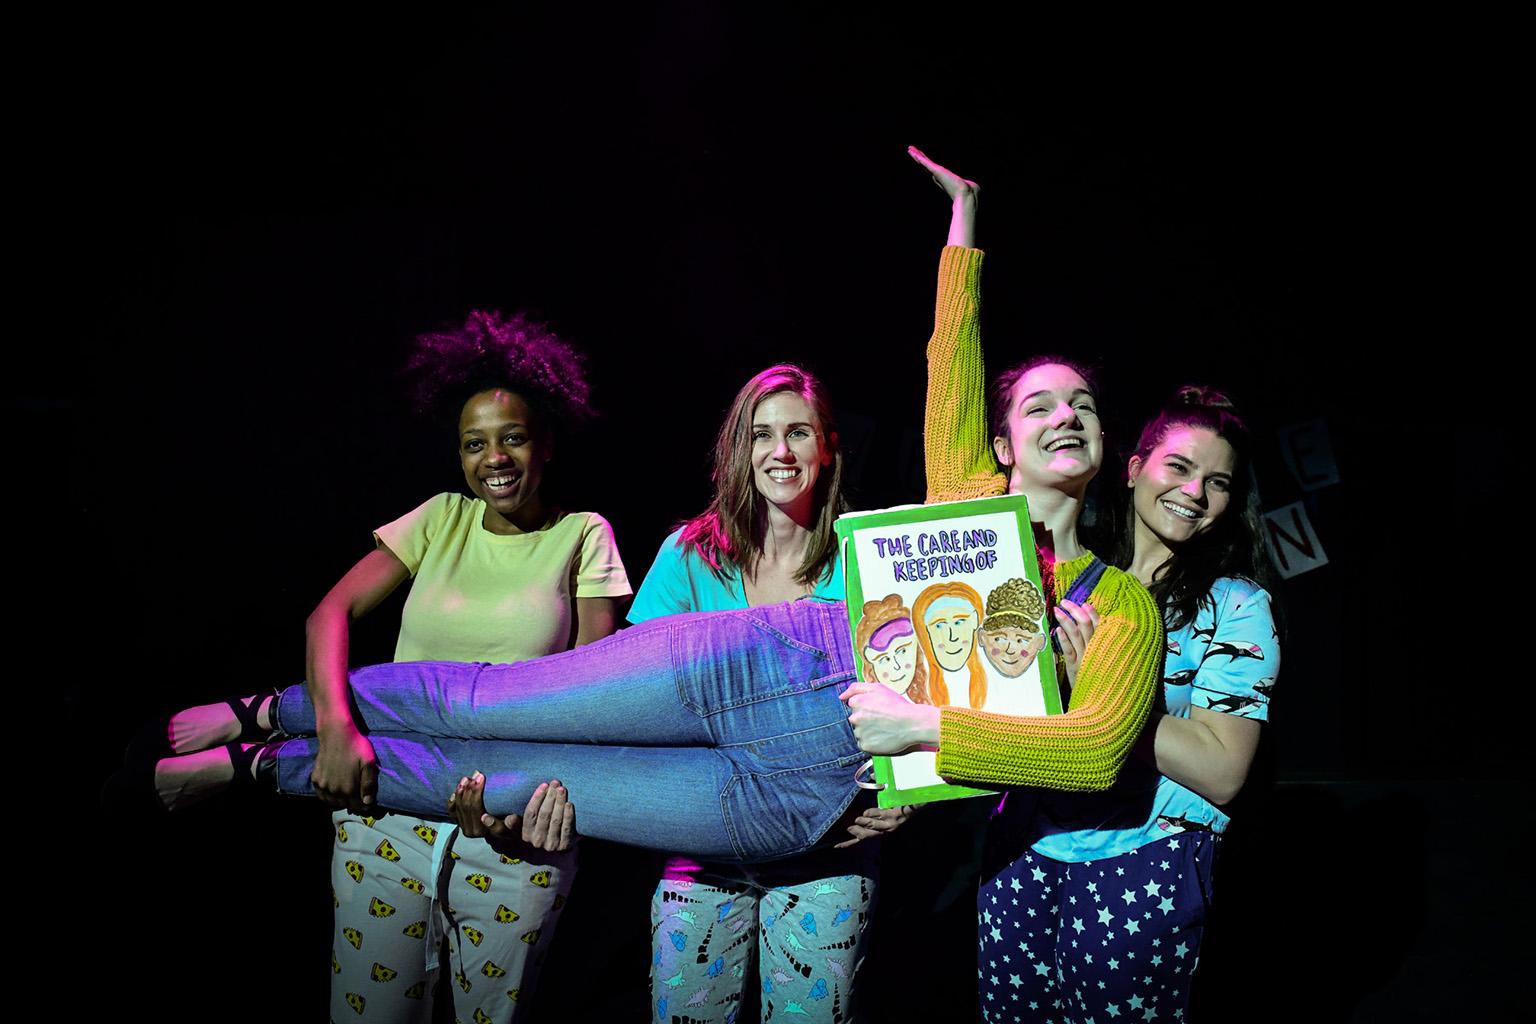 Madeline Lauzon, front, with, from left, Shelby Marie Edwards, Allison Taylor and Ricci Prioletti in “Lucky: A Musical,” part of Underscore Theatre Company’s 5th annual Chicago Musical Theatre Festival. (Photo by Evan Hanover)